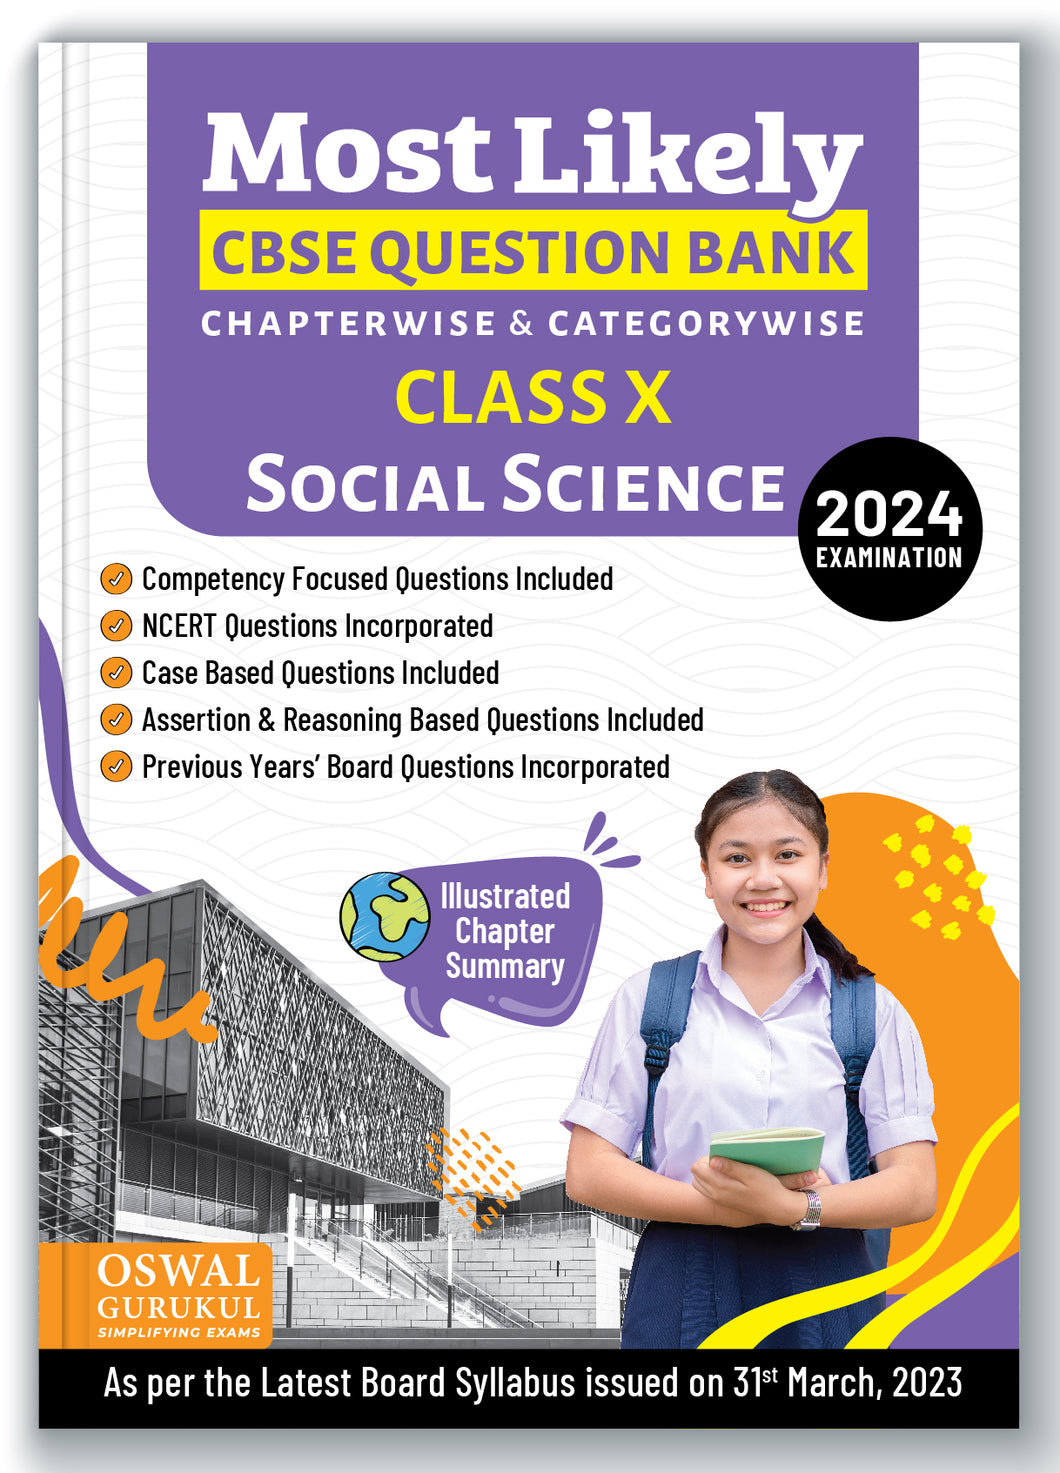 Oswal - Gurukul Social Science Most Likely Question Bank : CBSE Class 10 for 2024 Exam